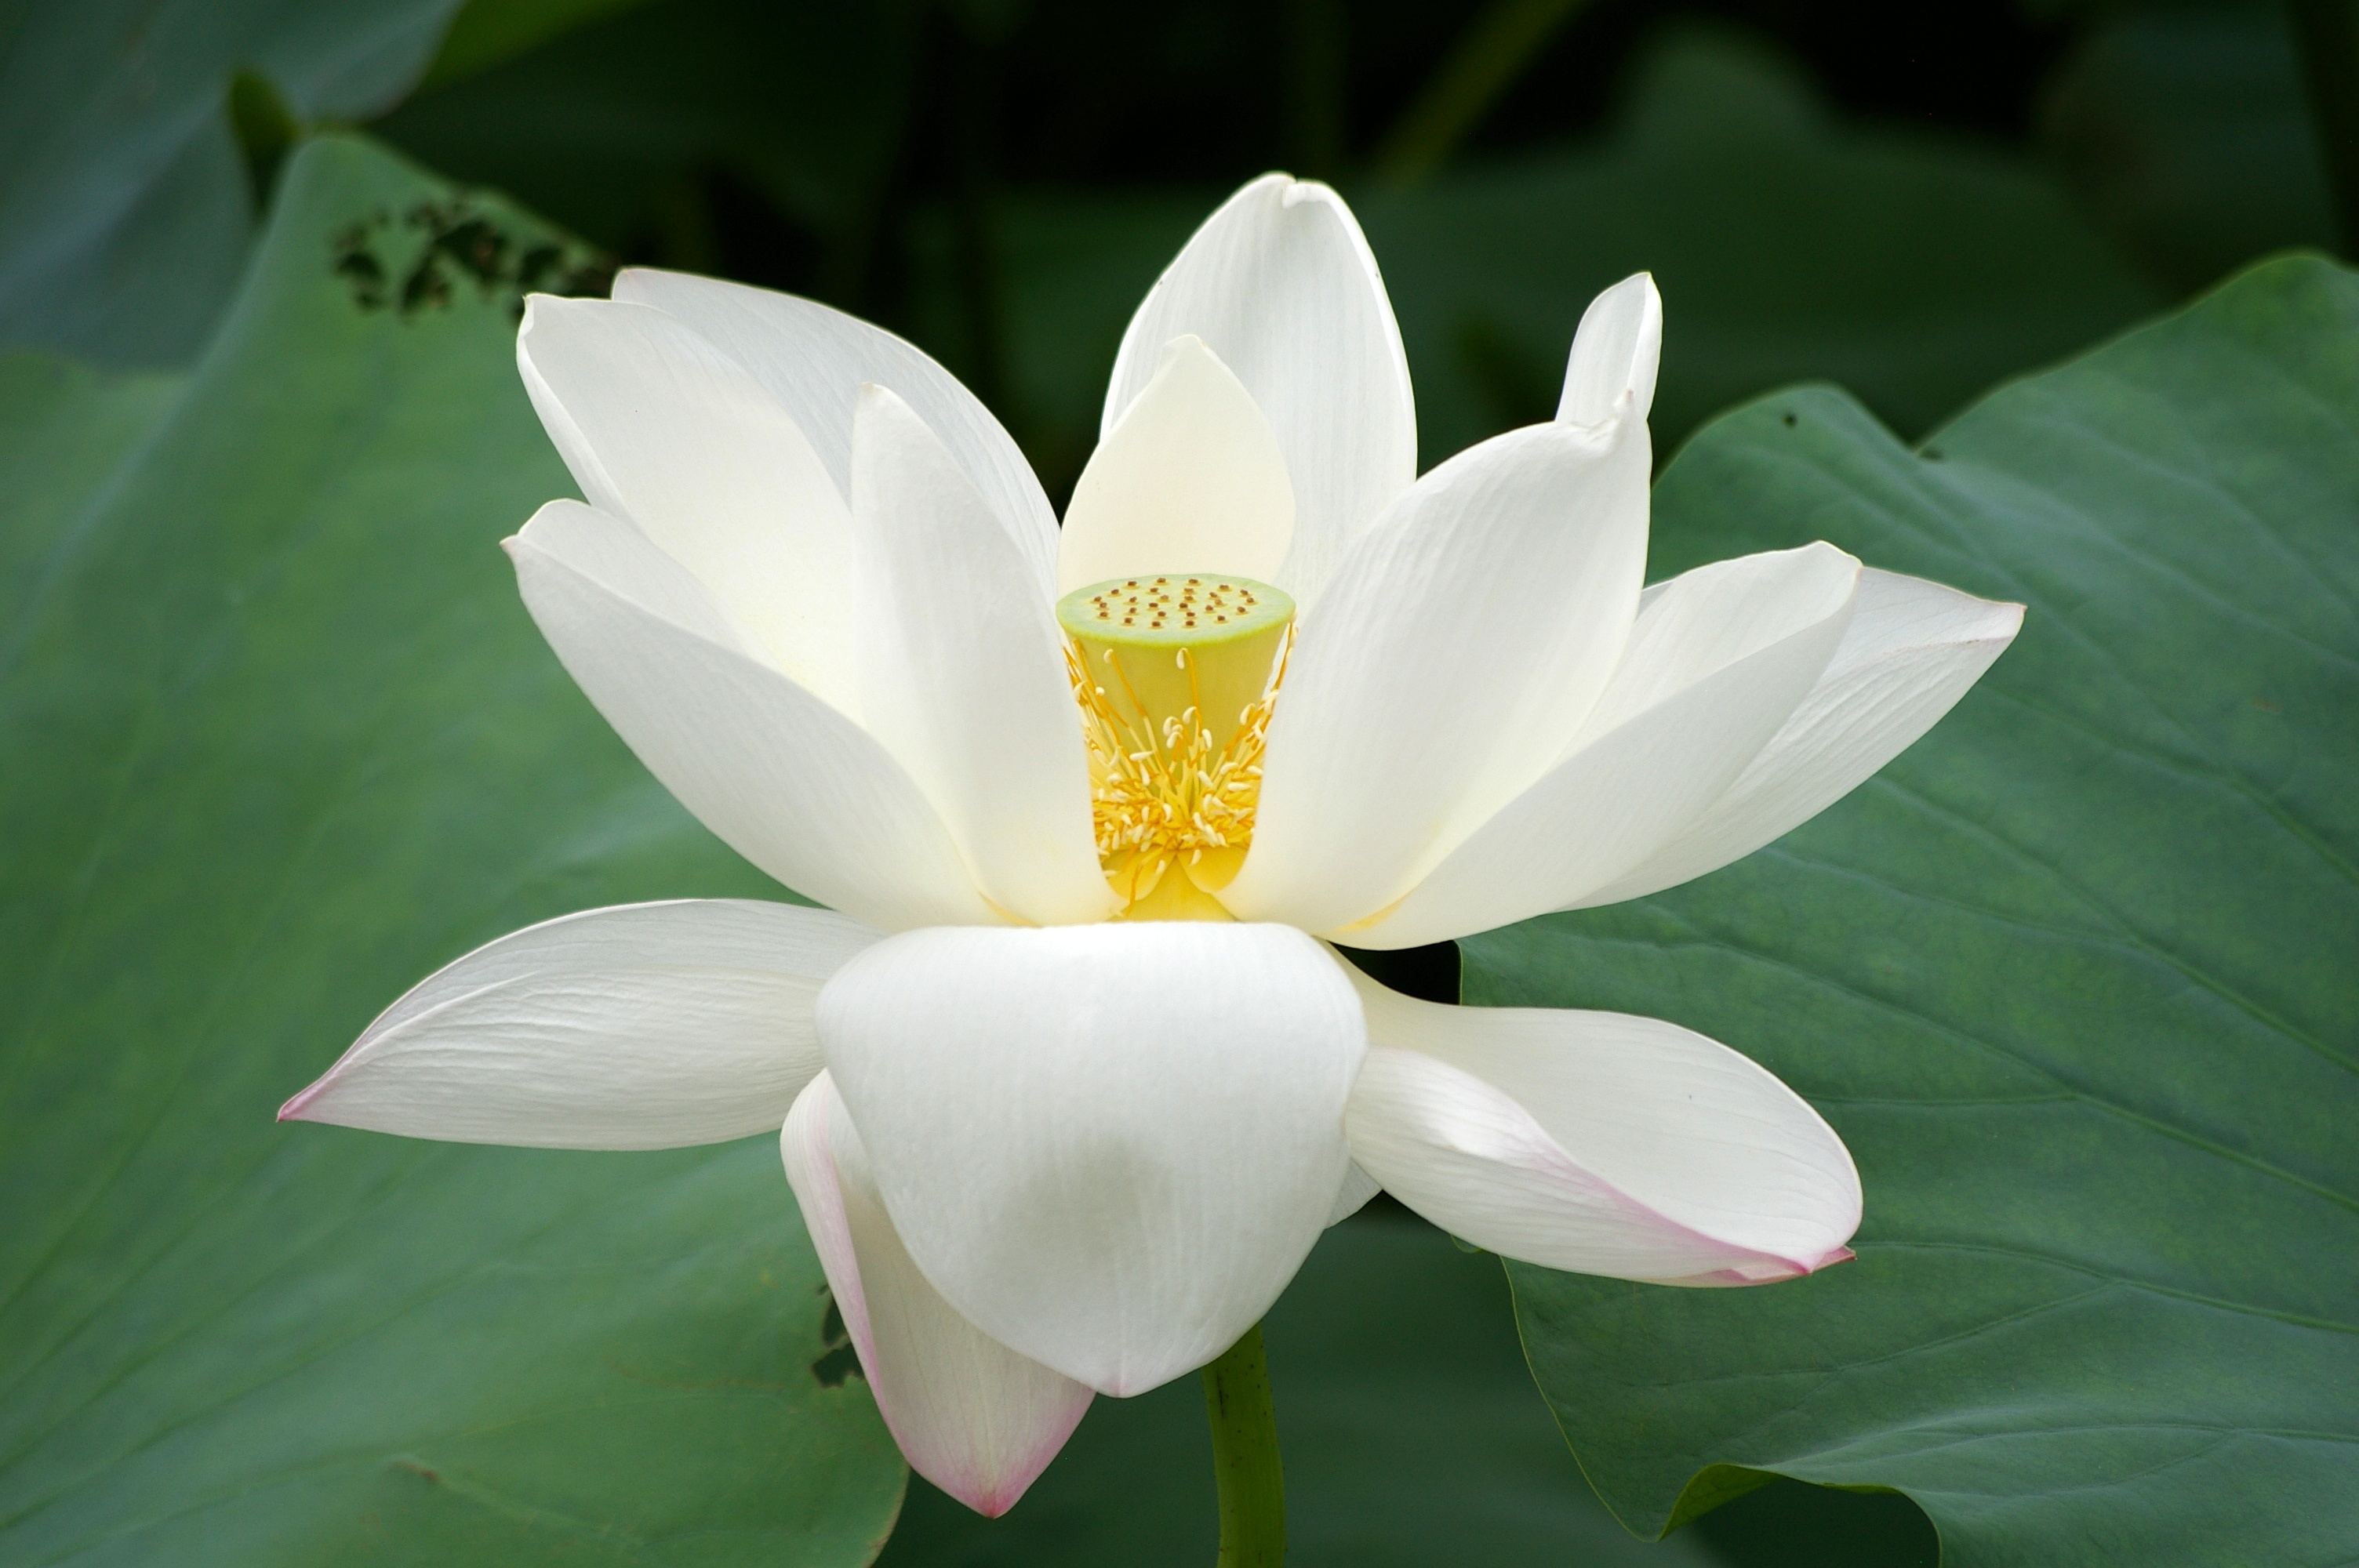 http://upload.wikimedia.org/wikipedia/commons/a/a9/20090809_Lotus_flower_2736.jpg